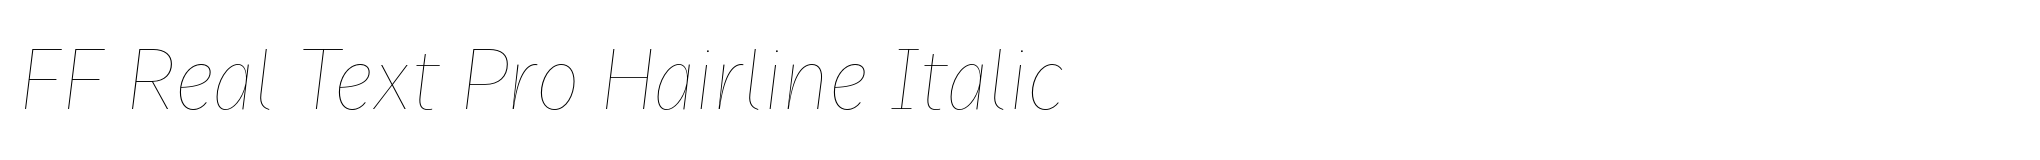 FF Real Text Pro Hairline Italic image